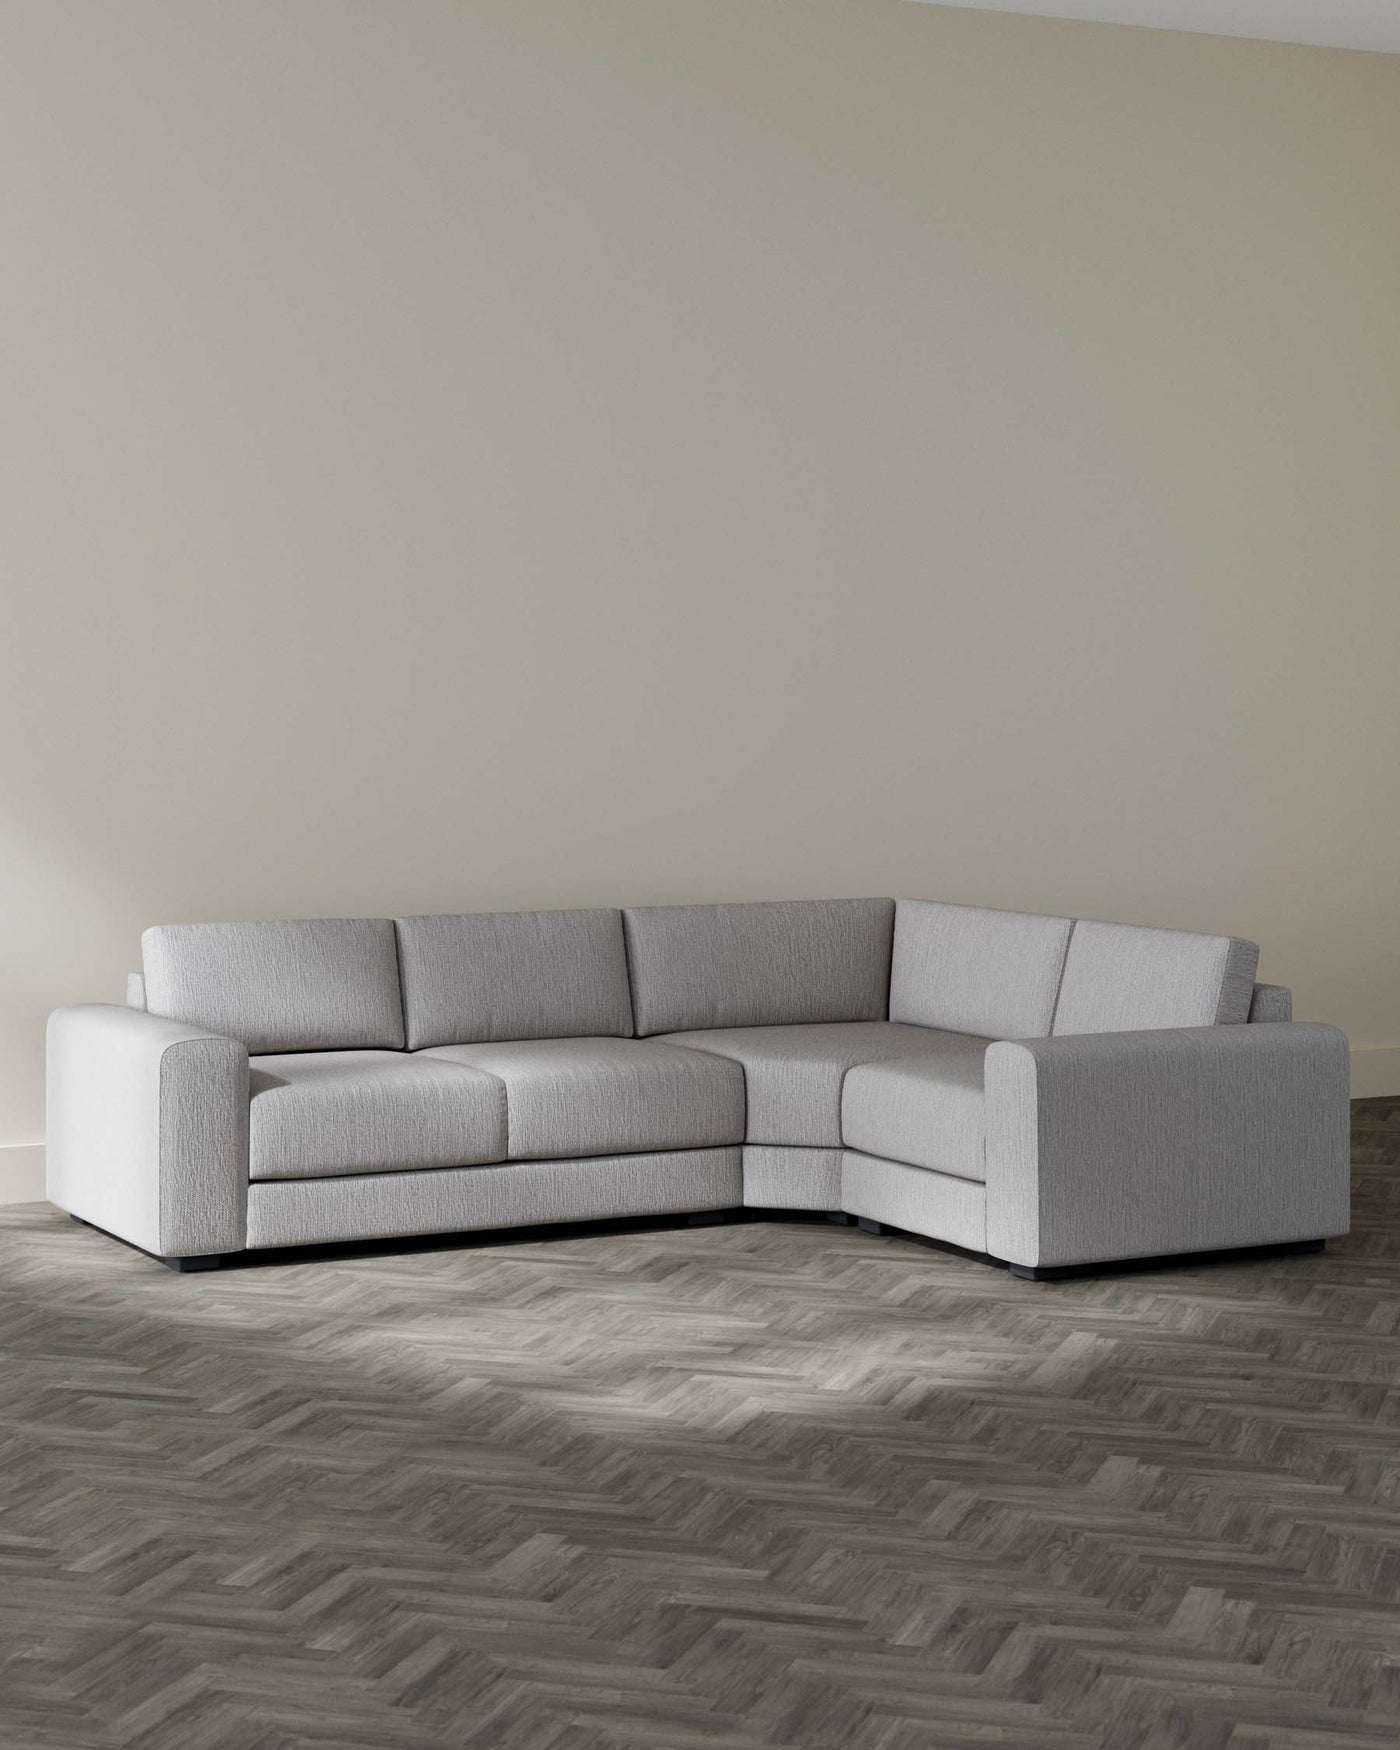 Contemporary light grey sectional sofa with a minimalist design, featuring clean lines, a low back, and wide armrests on a herringbone-patterned dark wood floor.